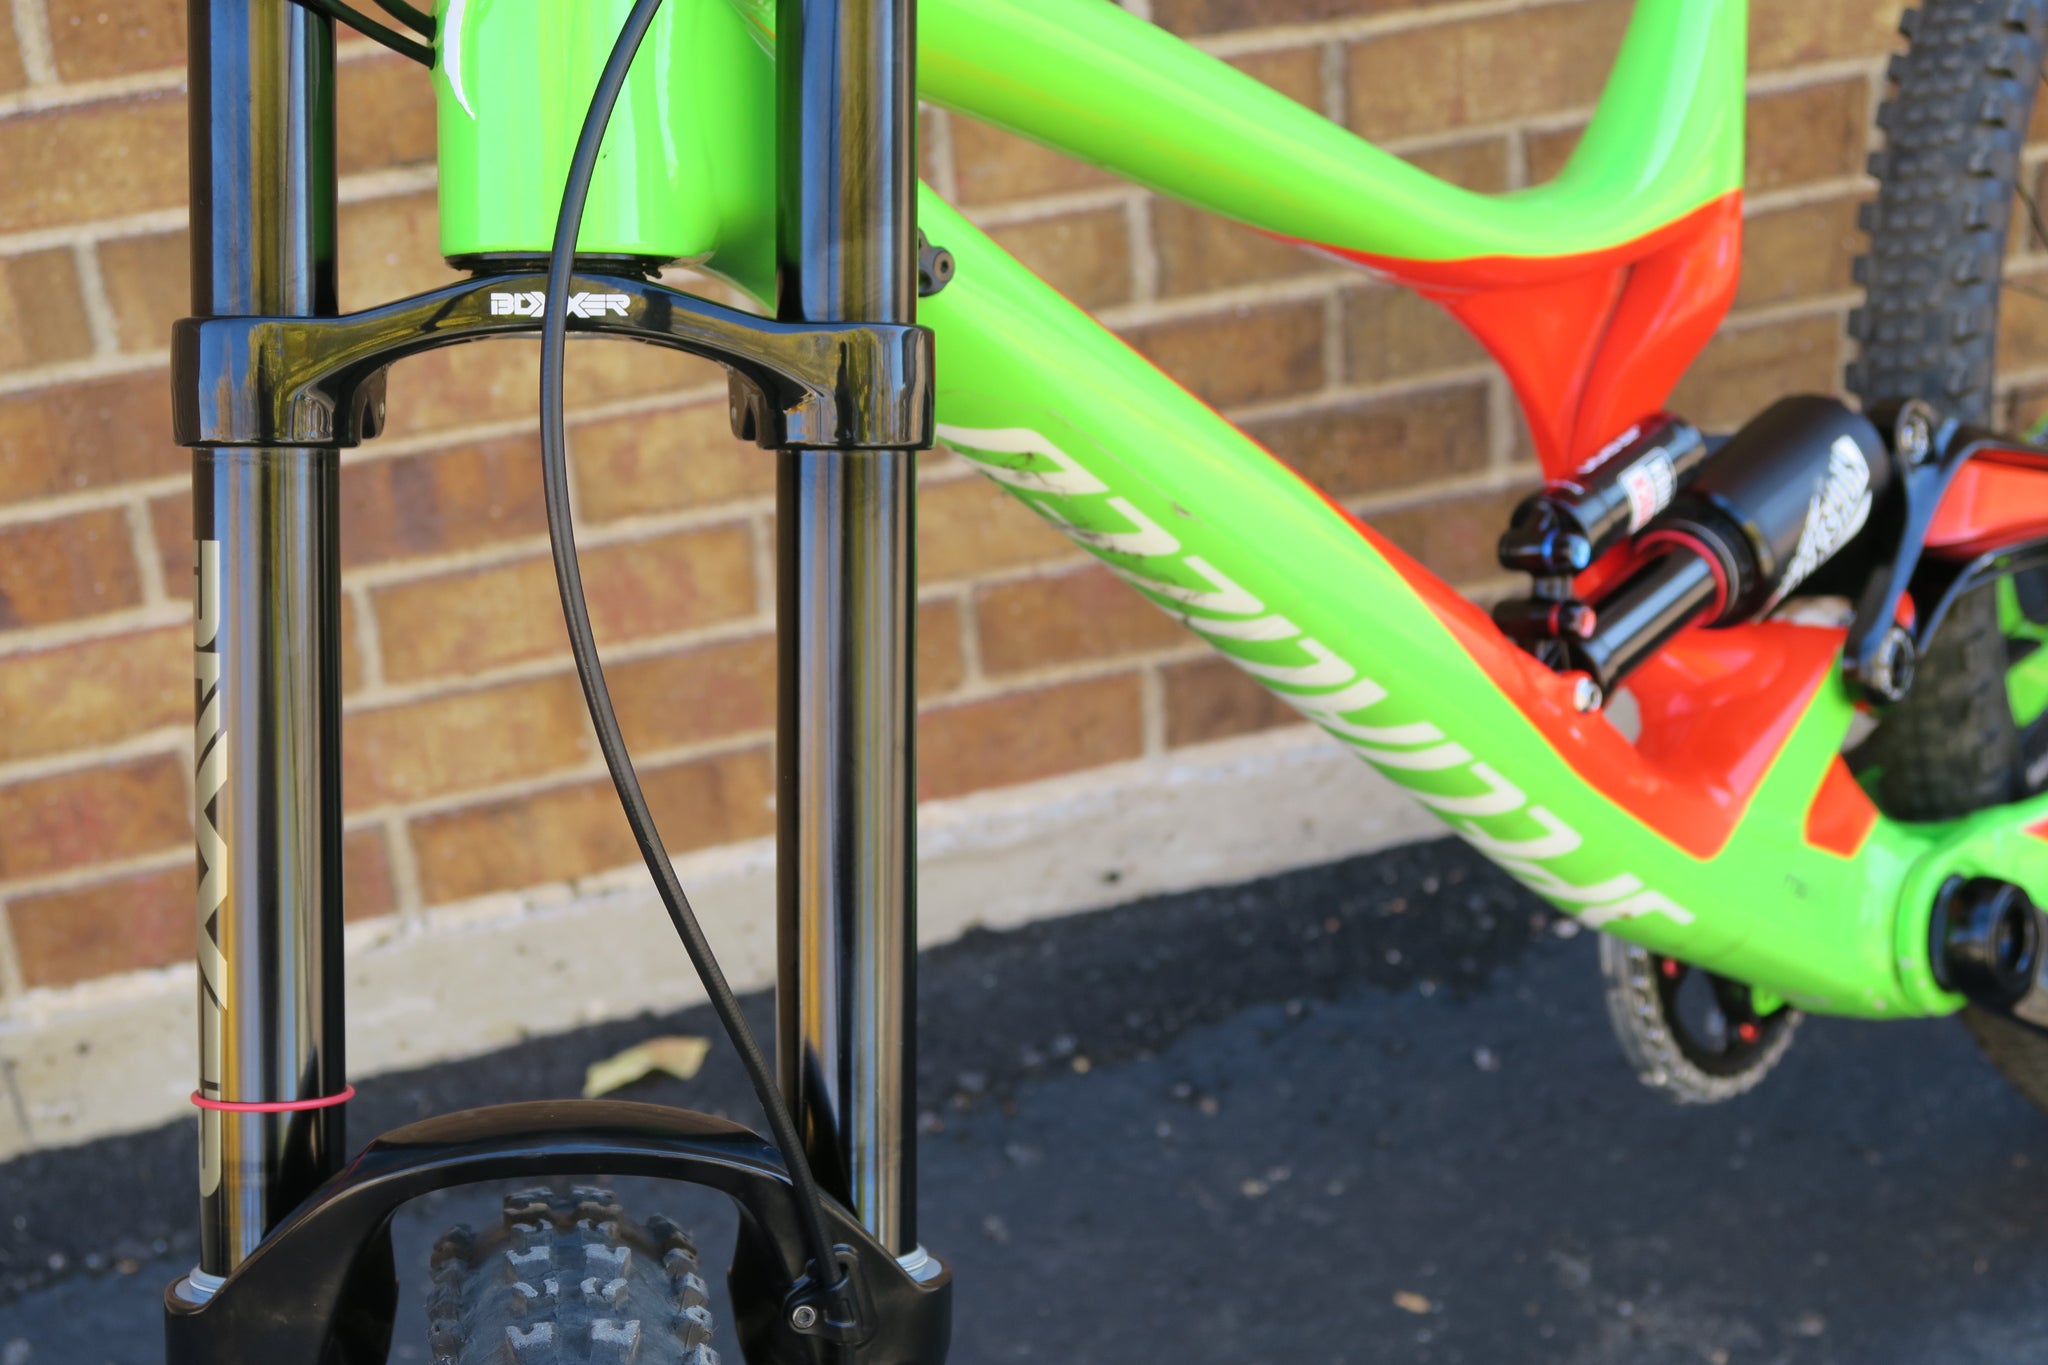 2016 SPECIALIZED DEMO 8 l ALLOY 650B 27.5"